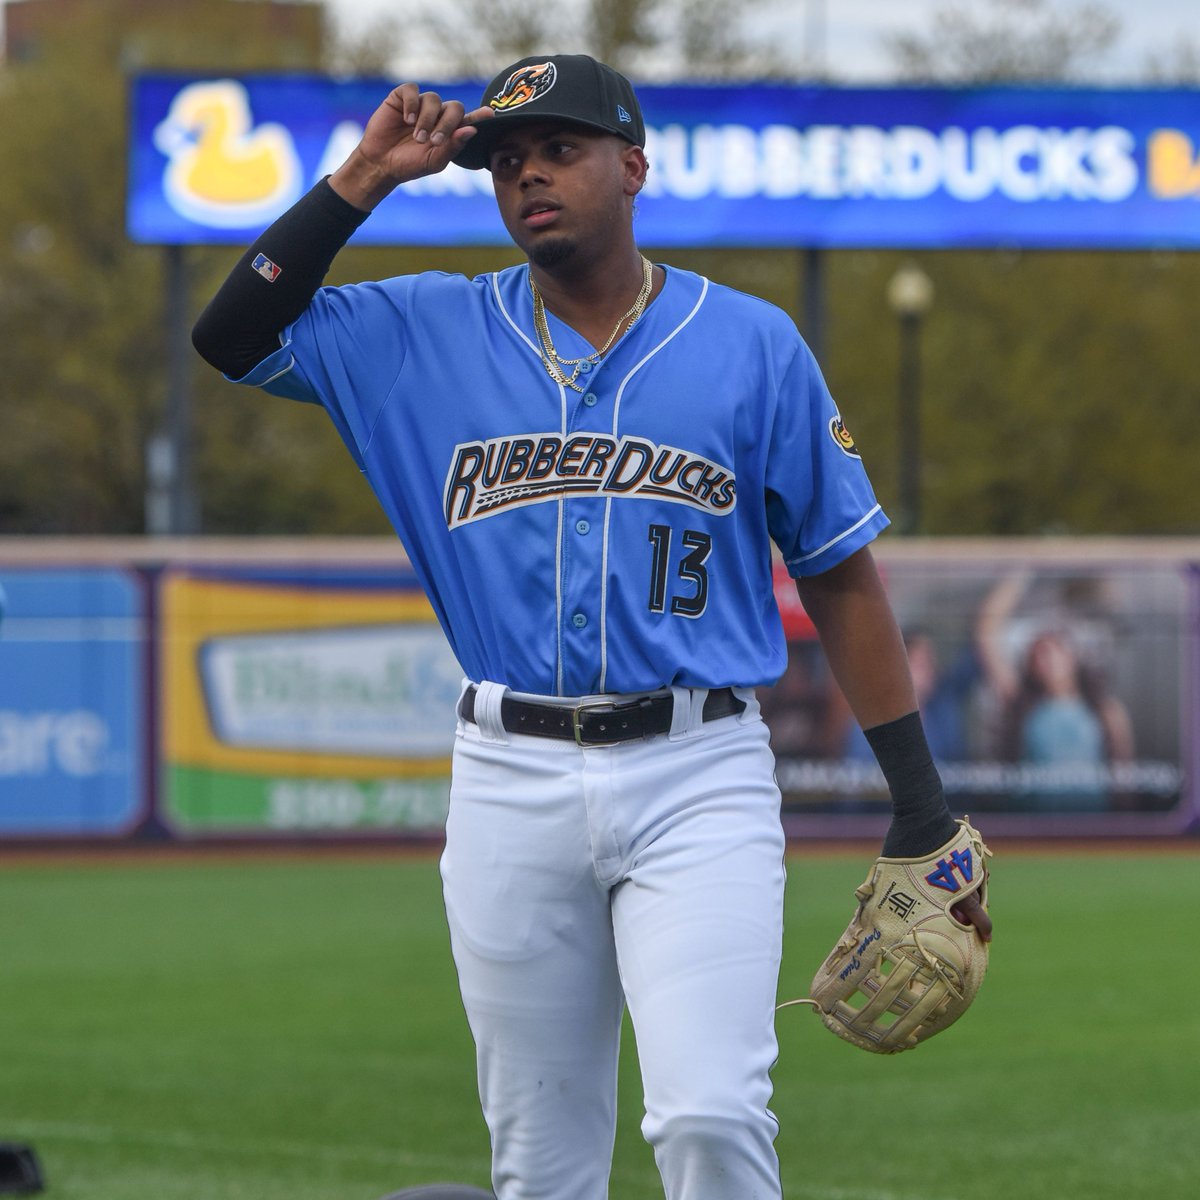 Guardians prospect Dayan Frias has baseball in his DNA, but he's out to carve his own path to the bigs. After improving over his first two seasons and getting valuable experience with Colombia in the WBC, Frias' stock is up: atmlb.com/3UDp1DW